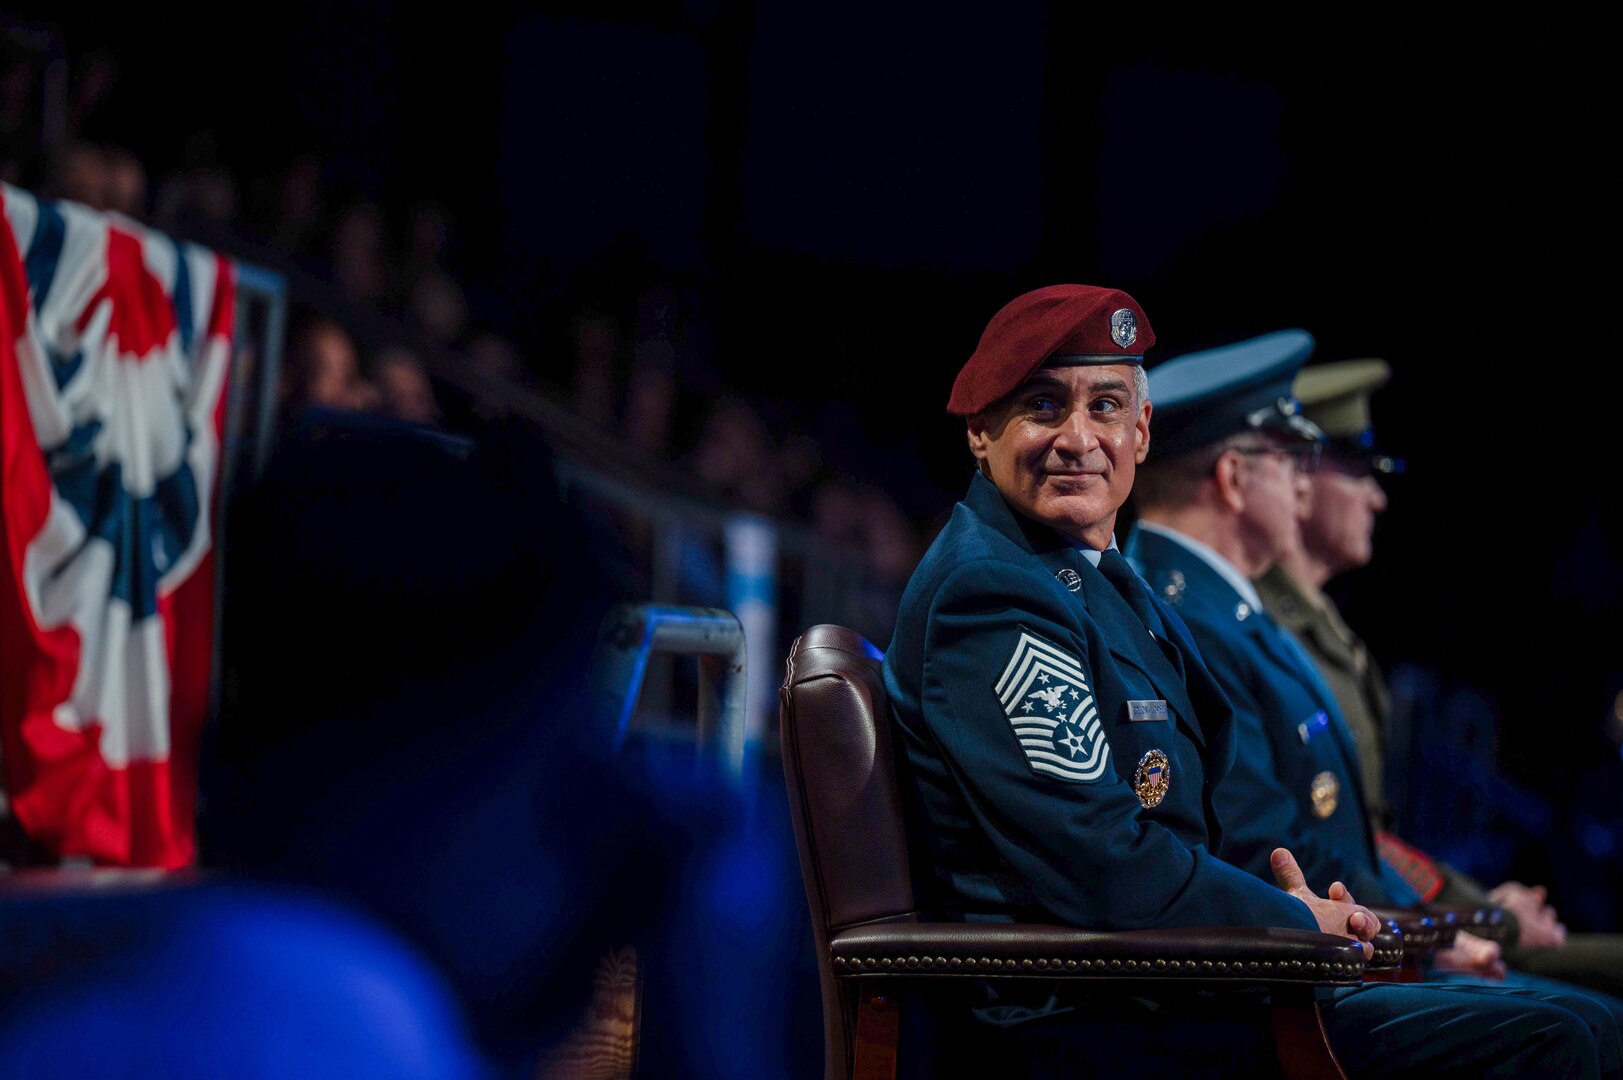 A seated uniformed service member smiles.